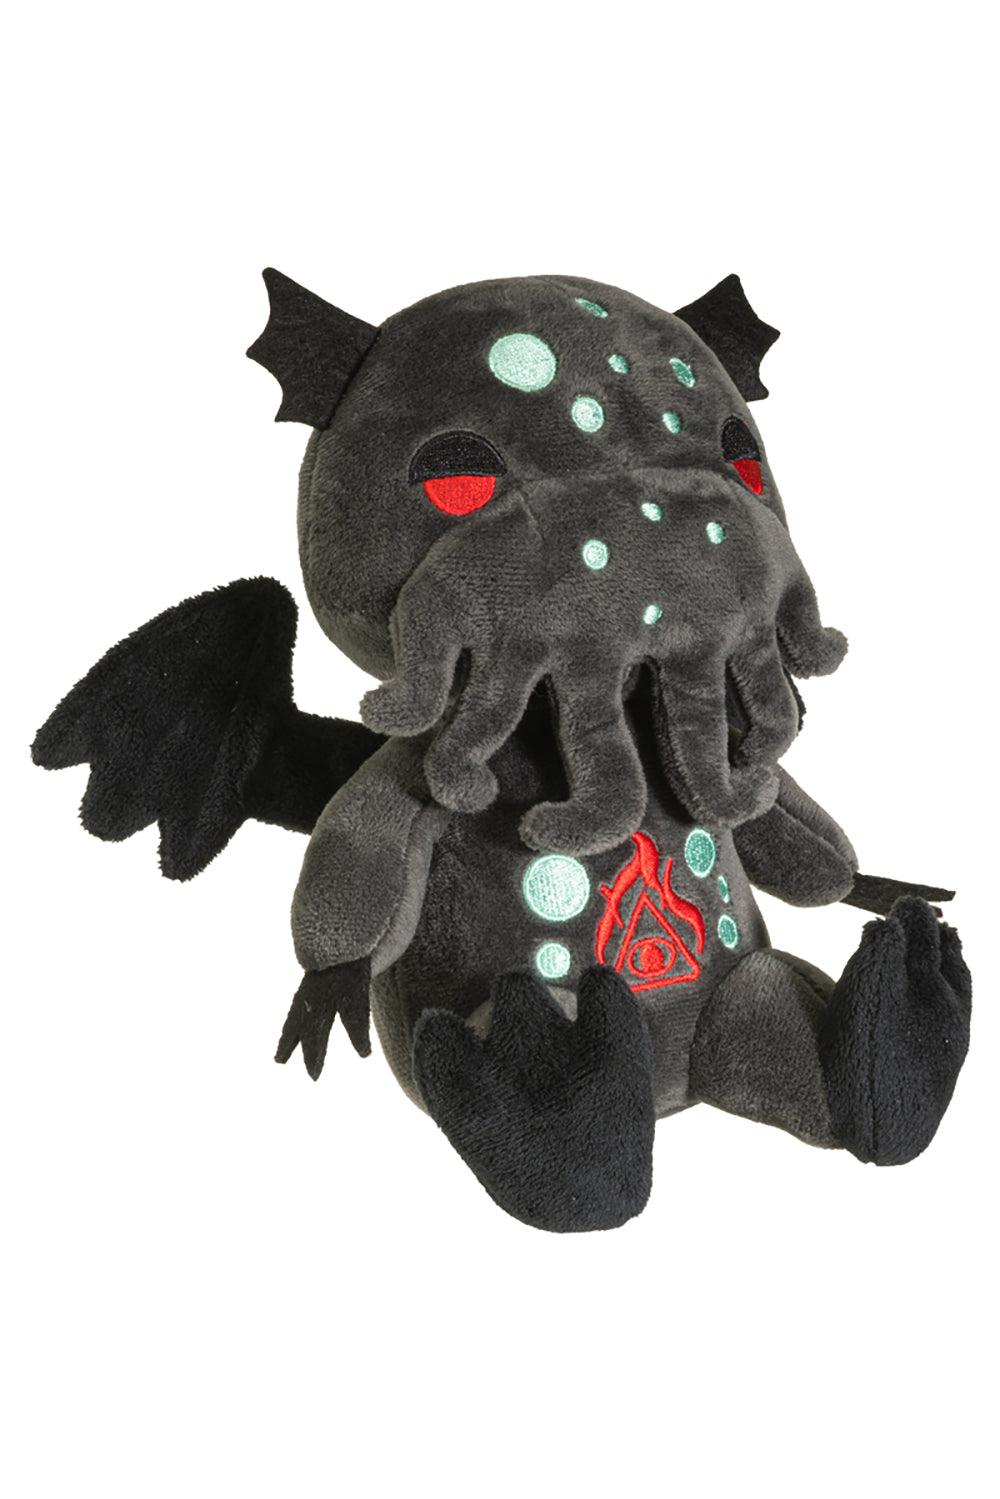 Pacific Giftware Cthulhu Plush Toy - VampireFreaks